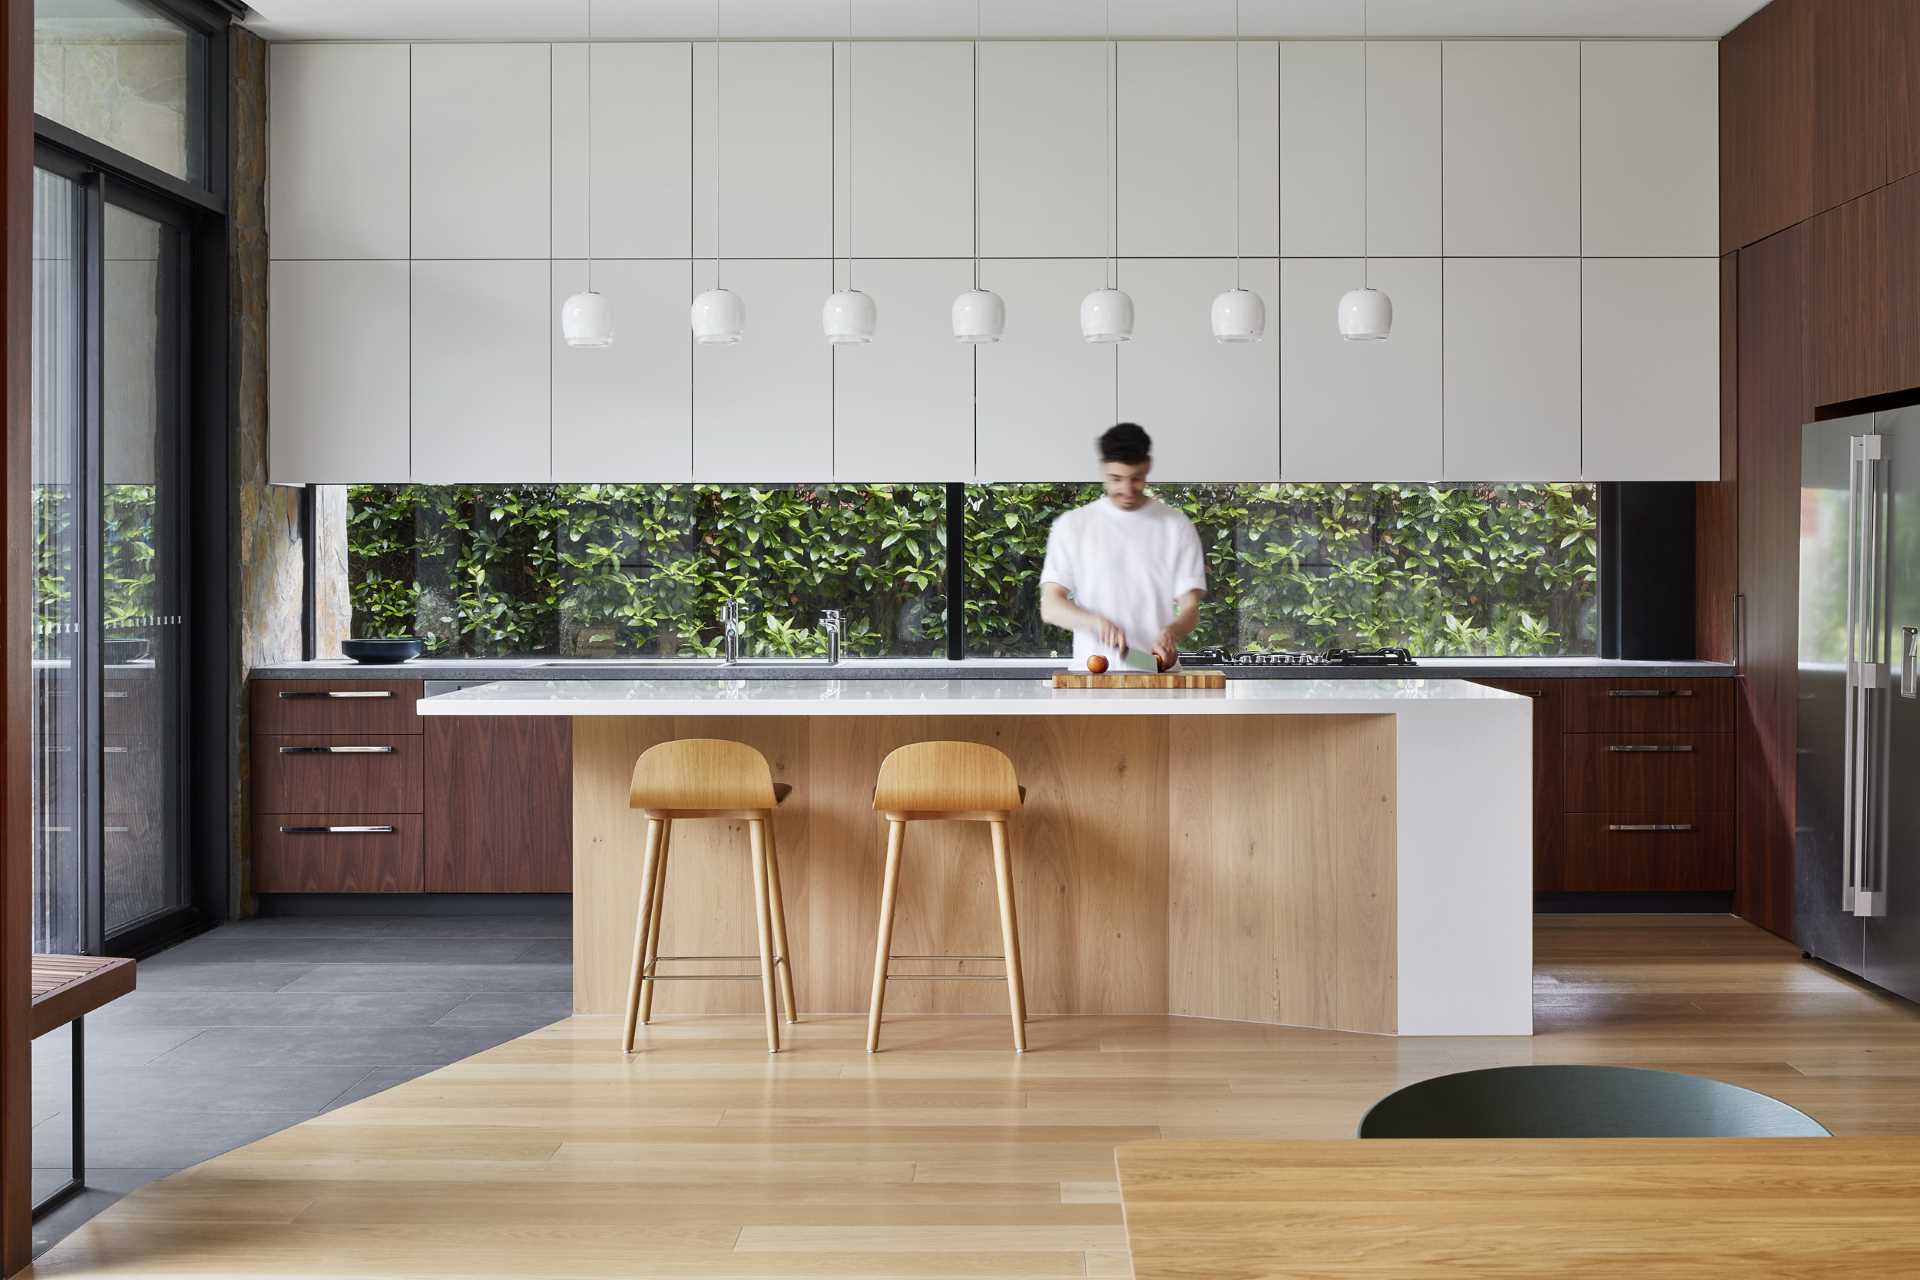 In this modern kitchen, dark wood cabinetry has been paired with minimalist white cabinets, while the island has room for a pair of stools and seven pendant lights to ensure the island is well-lit. The kitchen also includes a glass backsplash, allowing the plants outside to be seen.